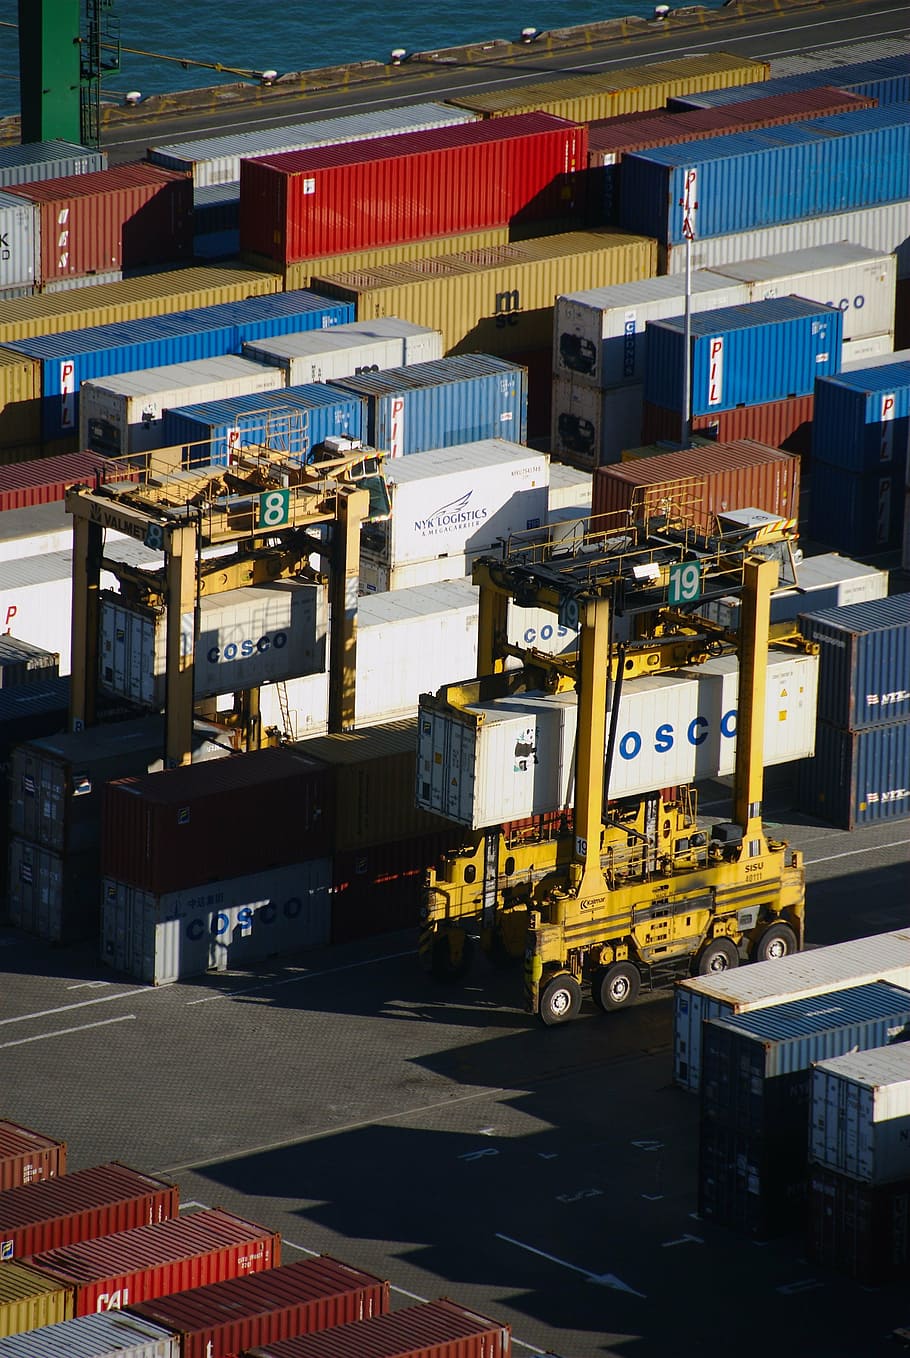 intermodal container lot, cargo, shipping, port, container, harbor, freight, transport, industry, transportation